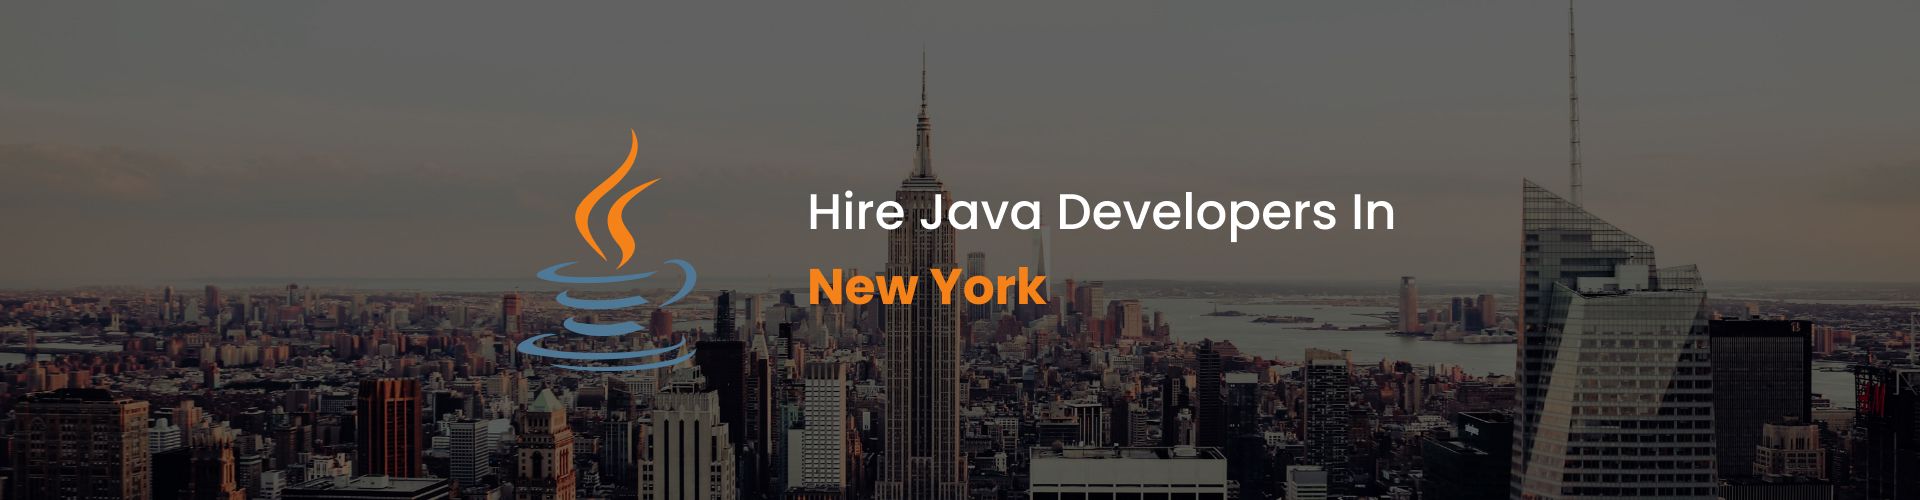 hire java developers in new york